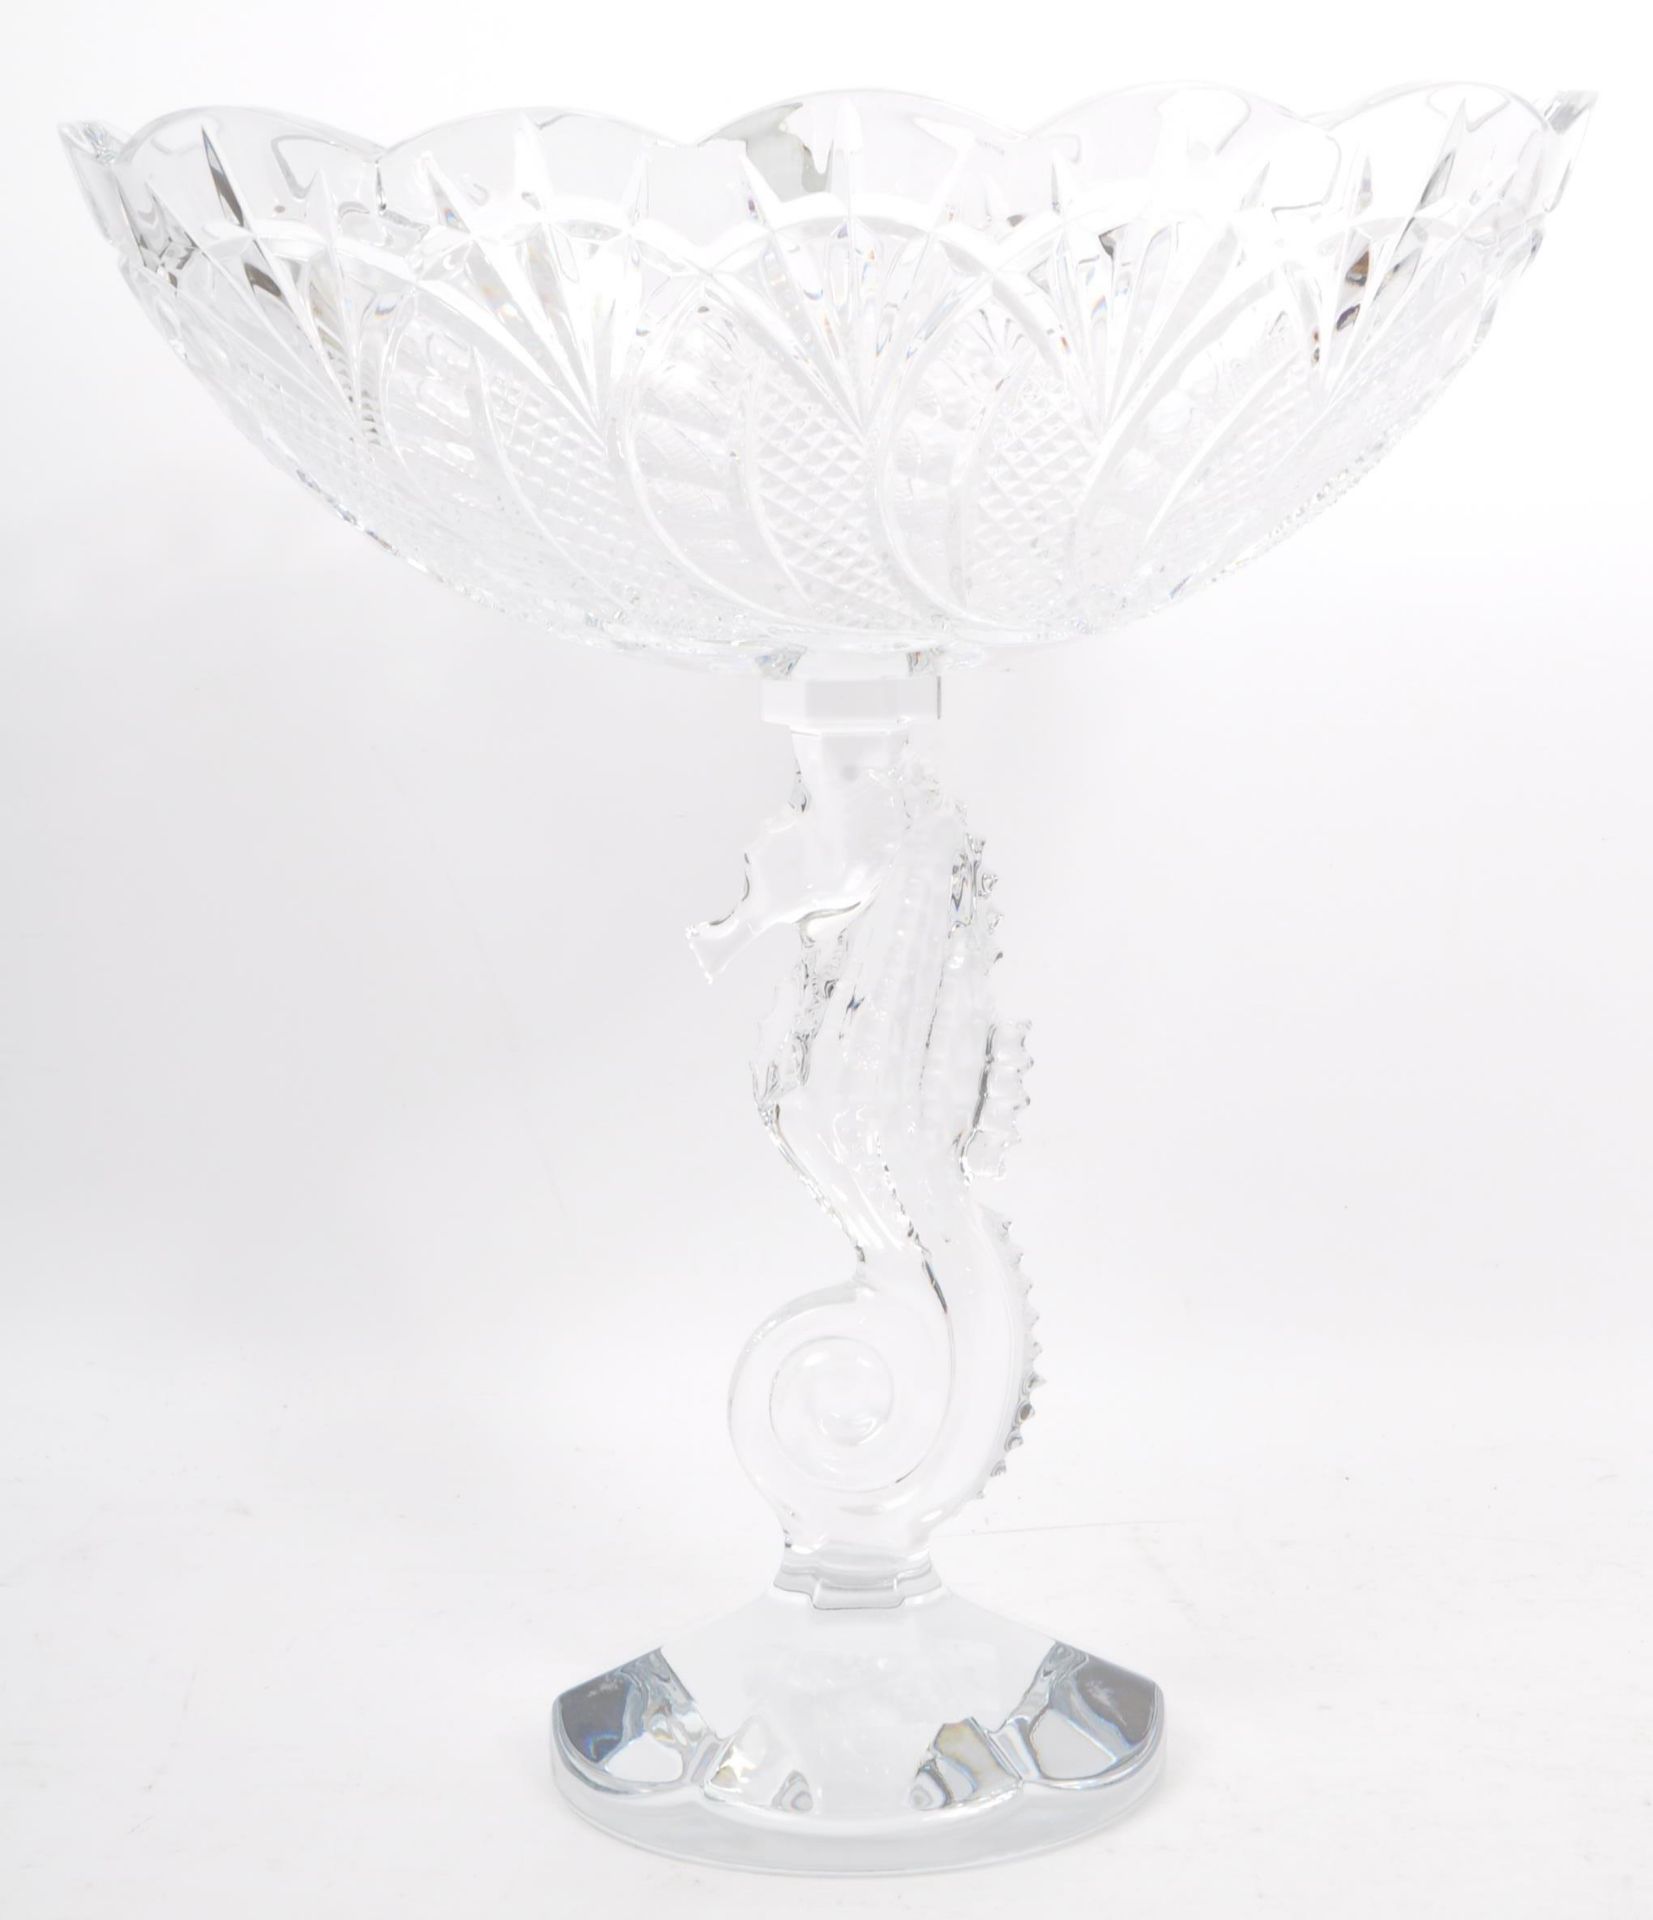 WATERFORD CRYSTAL GLASS - SEAHORSE TAZZA CENTREPIECE NOS - Image 2 of 7